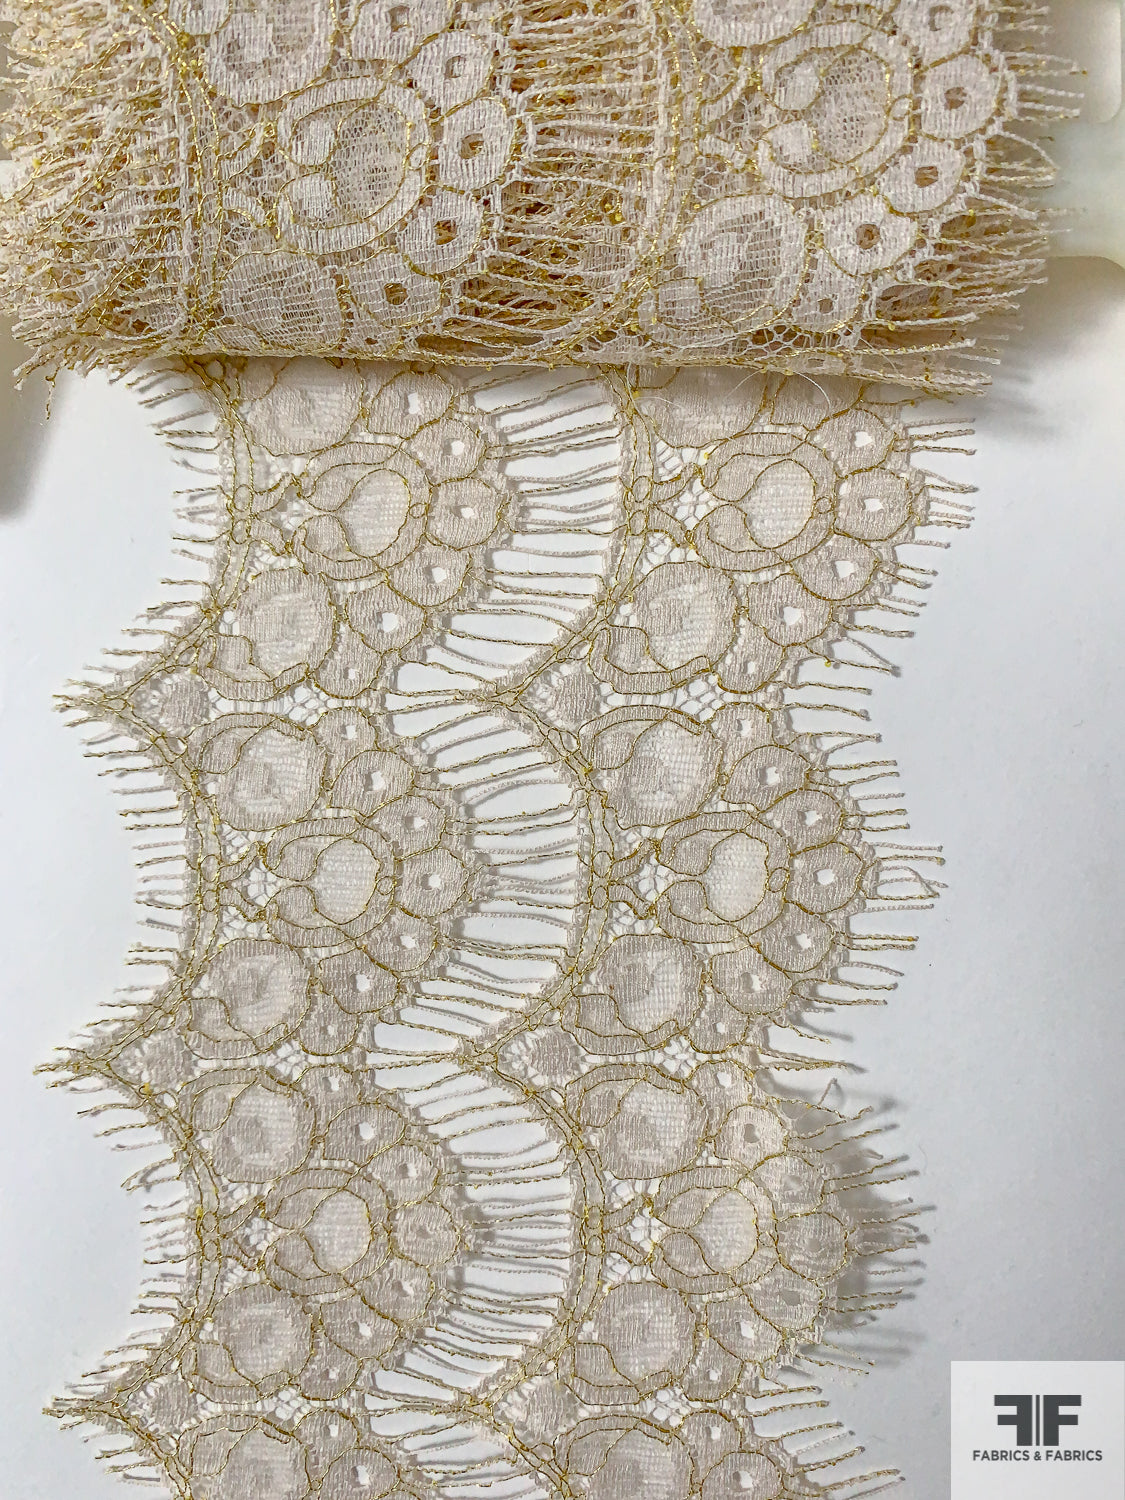 Metallic and Eyelash Leavers Lace Trim - Cream / Gold - Fabric by the Yard